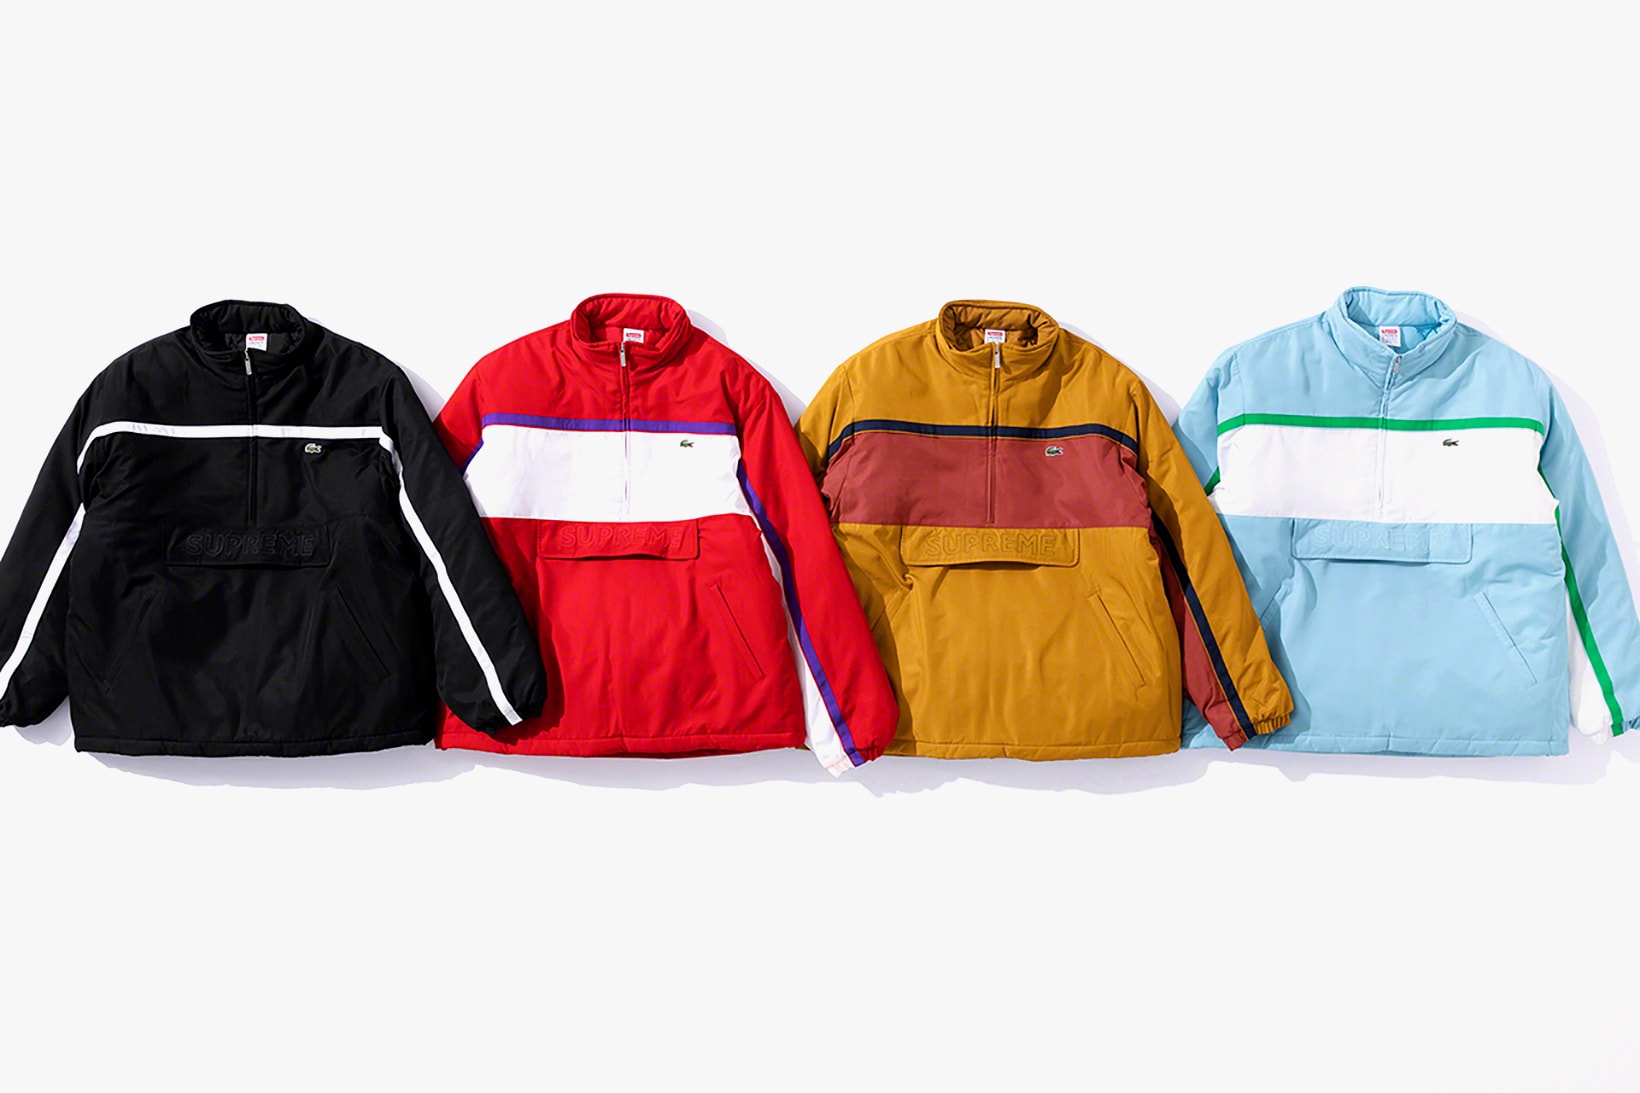 supreme lacoste fall winter collection jackets hoodies pants hats beanies release date clothes fashion